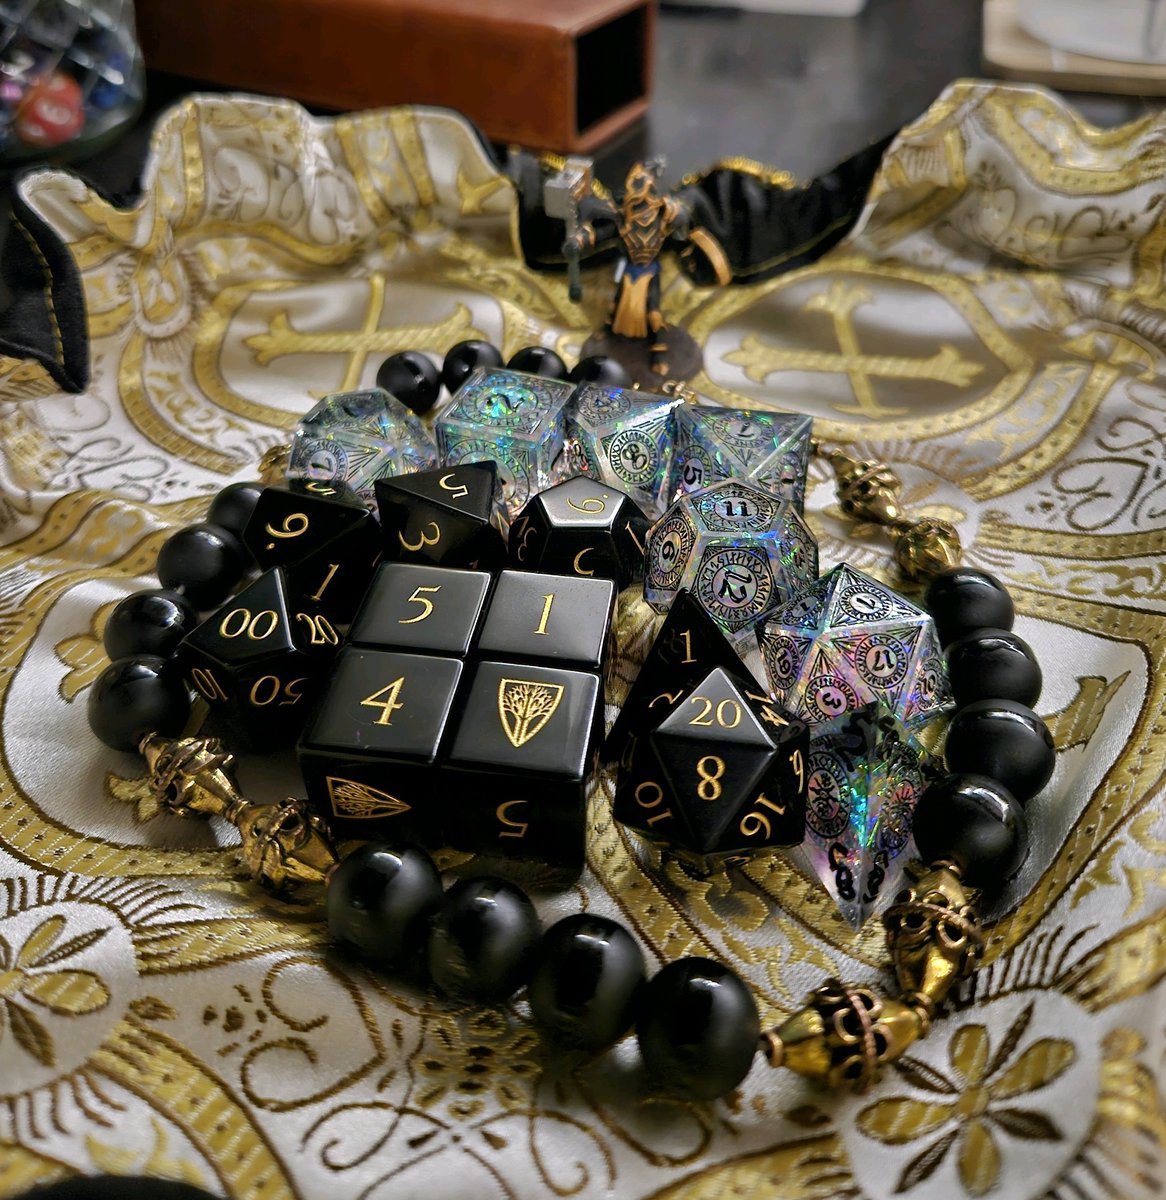 Take a closer look at Tyrall's dice and dice bag, with the rosary prop made by our lovely DM

#dungeonsanddivergents #dnd #dnd5e #dungeonsanddragons5e #neurodivergent #ttrpg #dnddice #d20 #dndgroup #livestream #twitch #twitchstreamer #dnddice #dnddicebags #dicegoblin